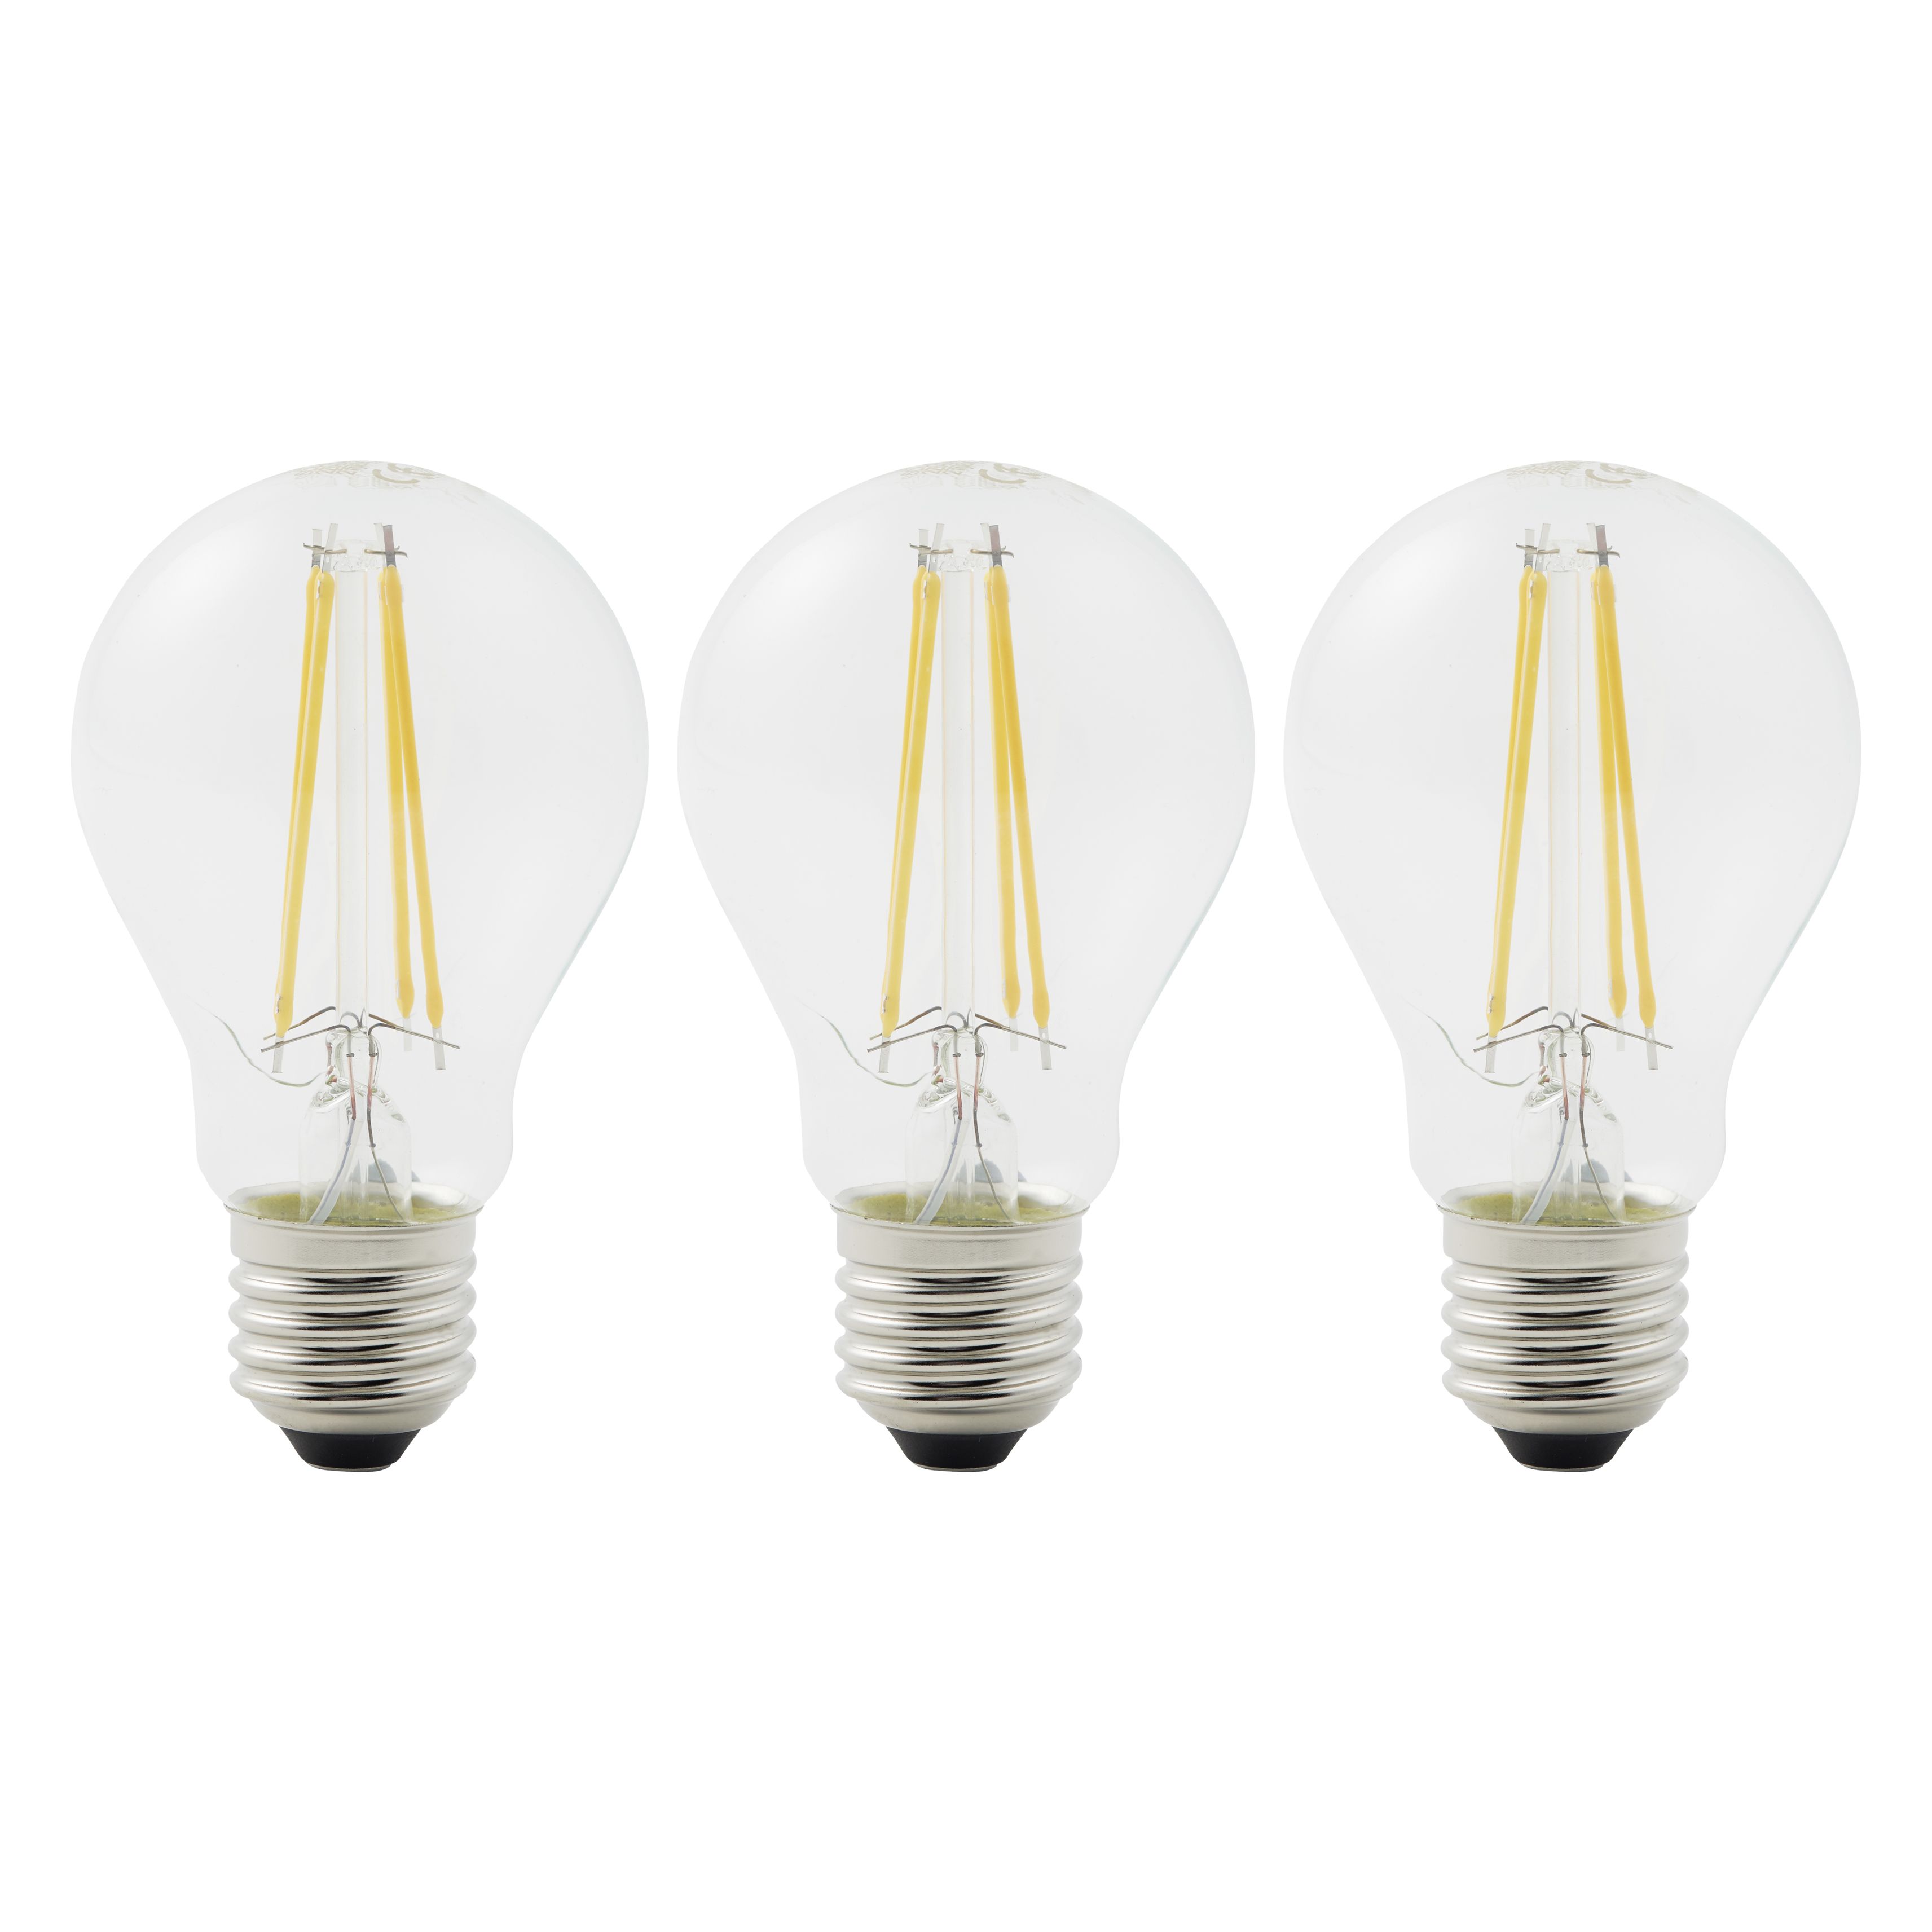 Diall E27 7W 806lm GLS Warm white LED Dimmable Light bulb, Pack of 3